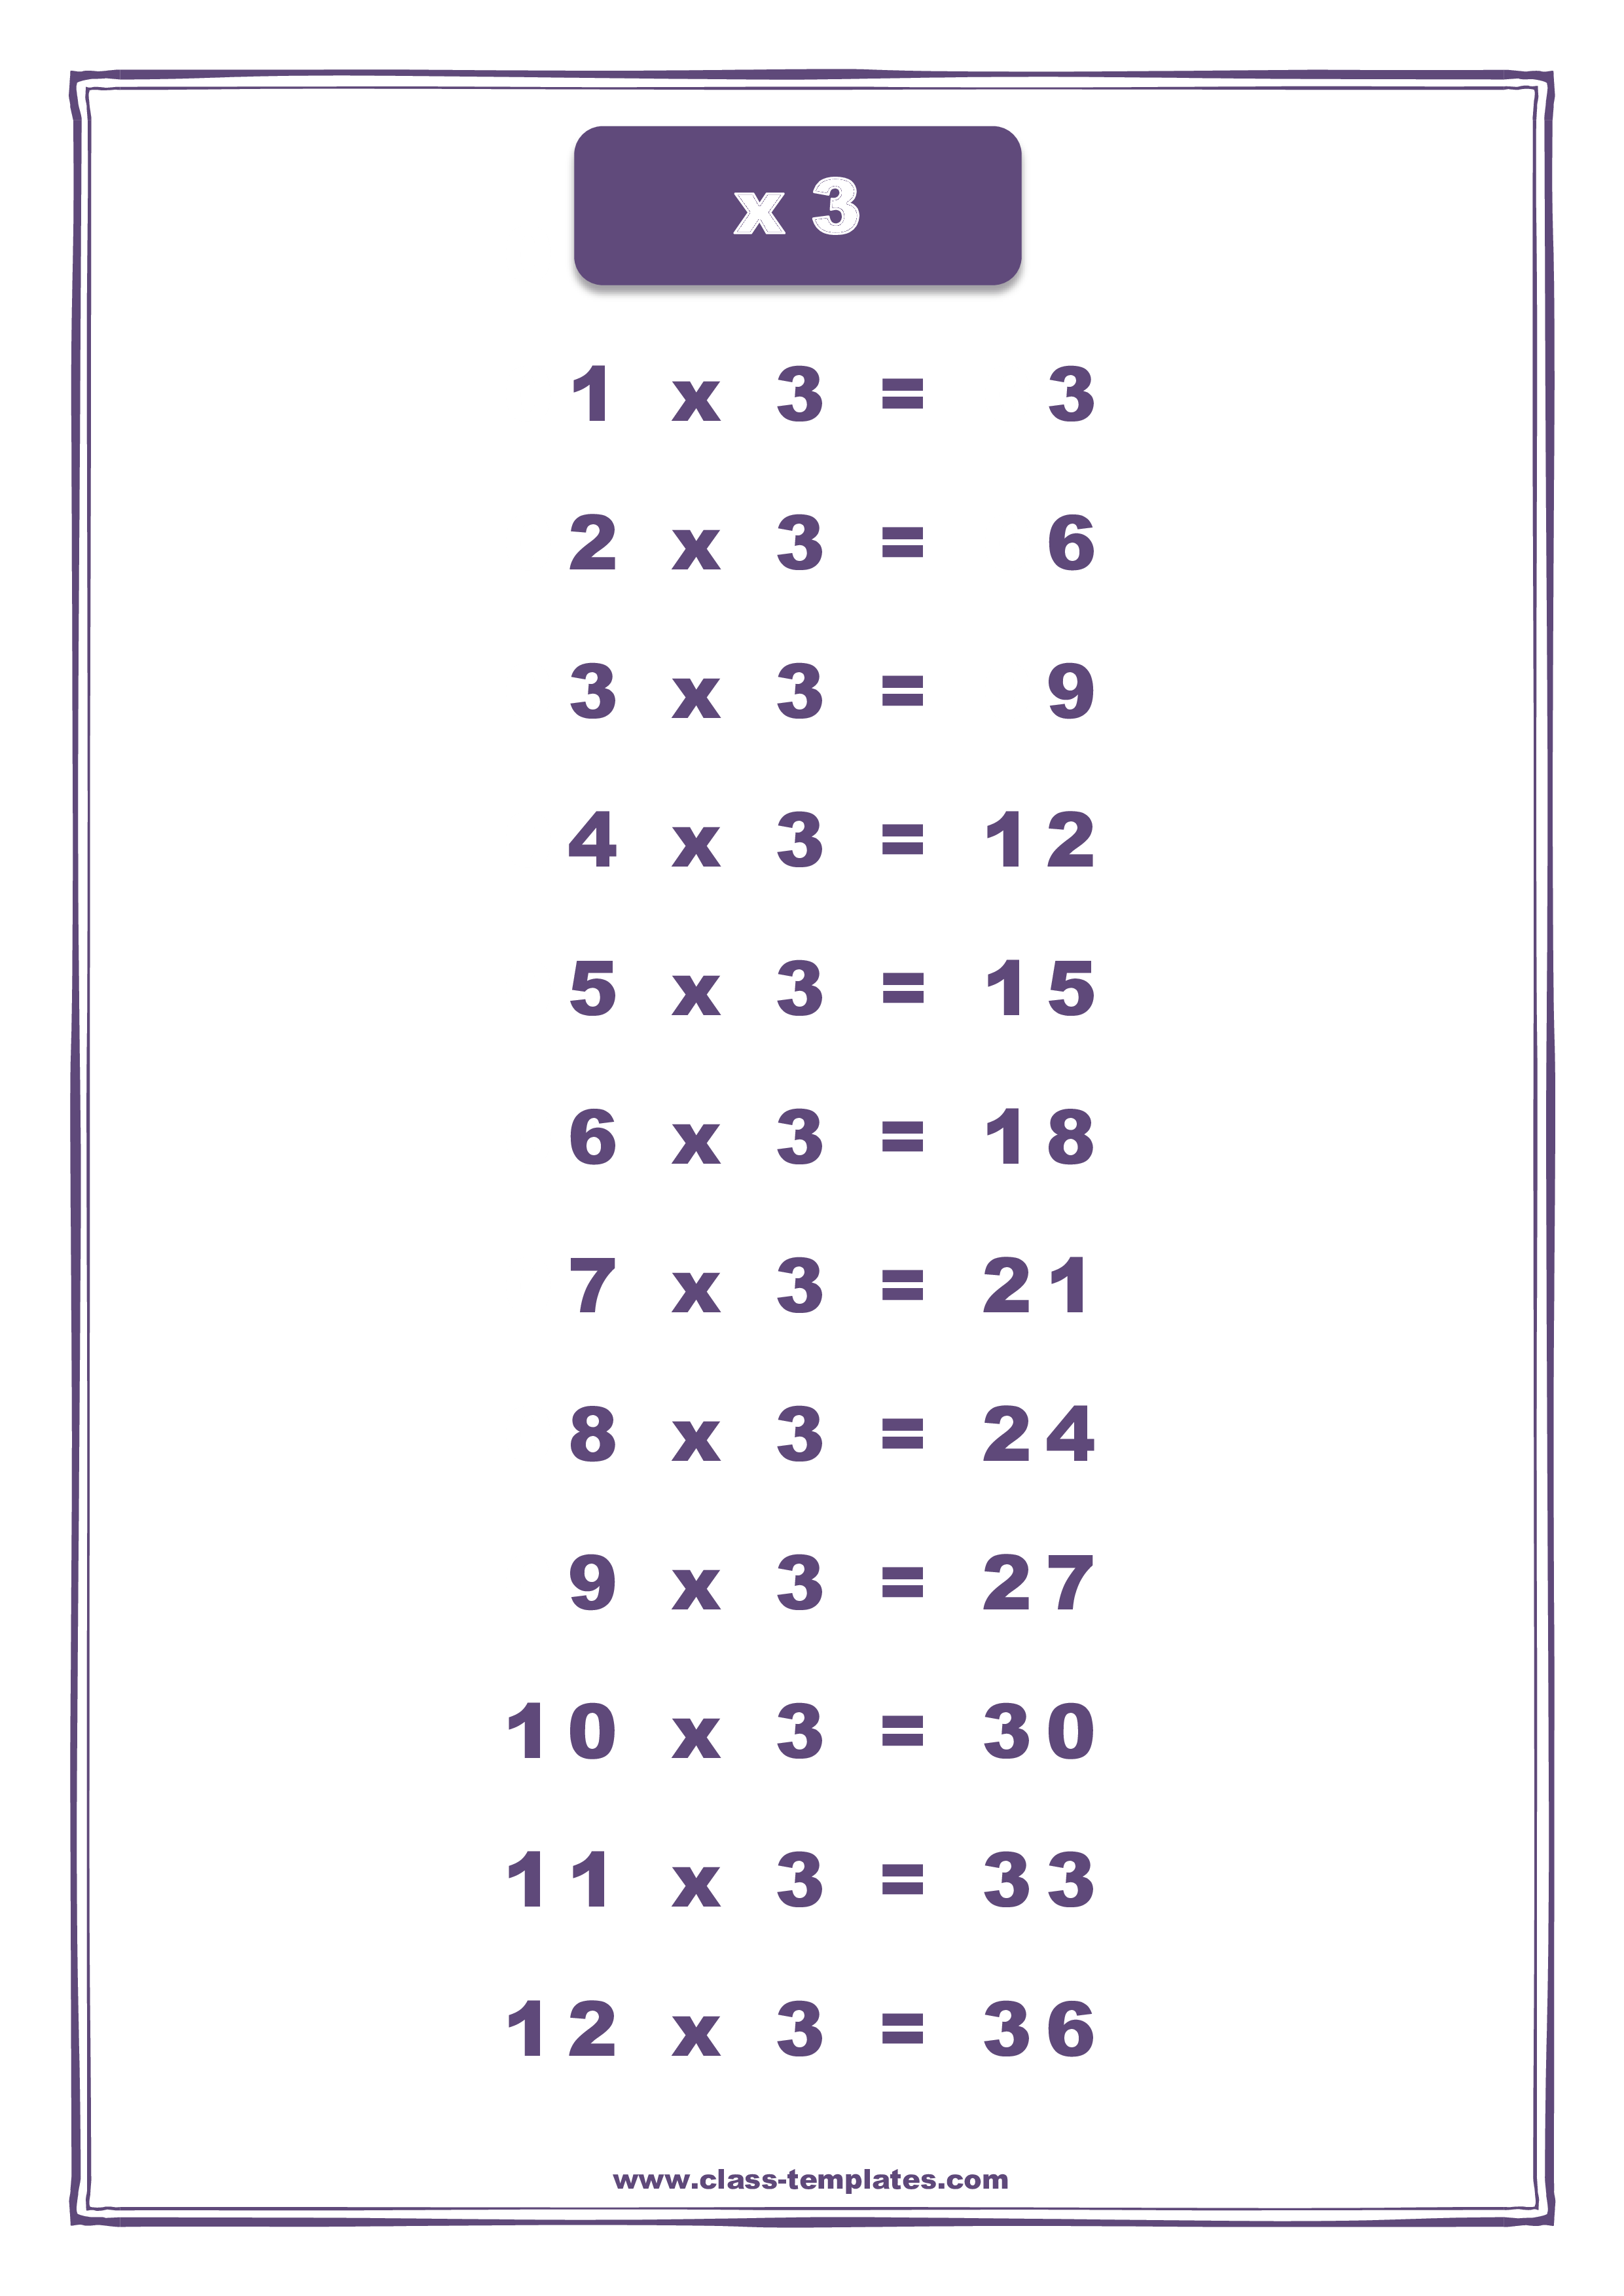 X3 Times Table Chart main image